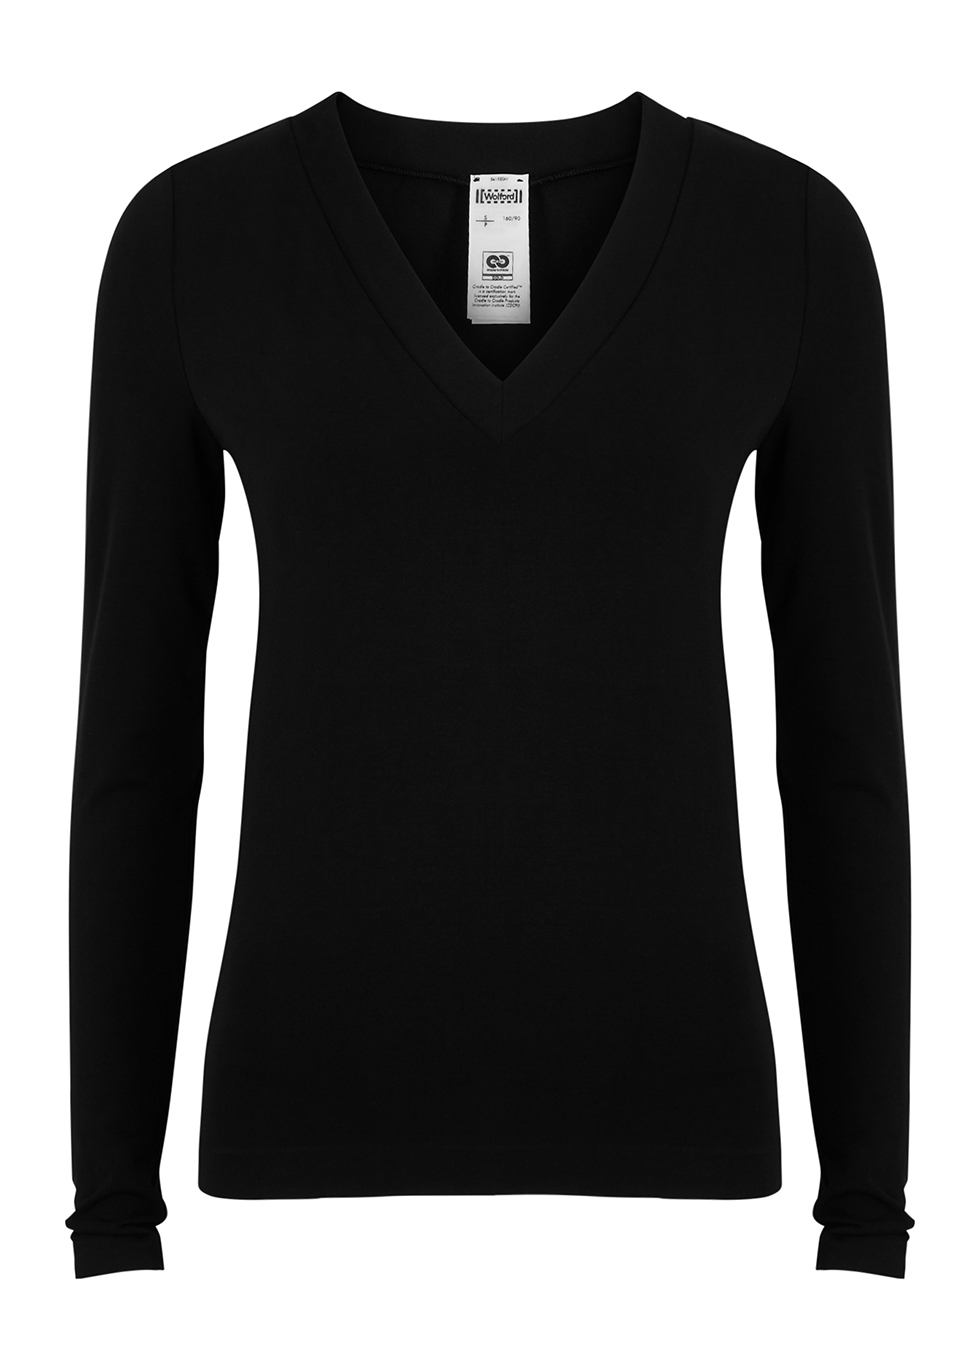 SALES - Wolford Aurora black stretch-jersey top with trendy style